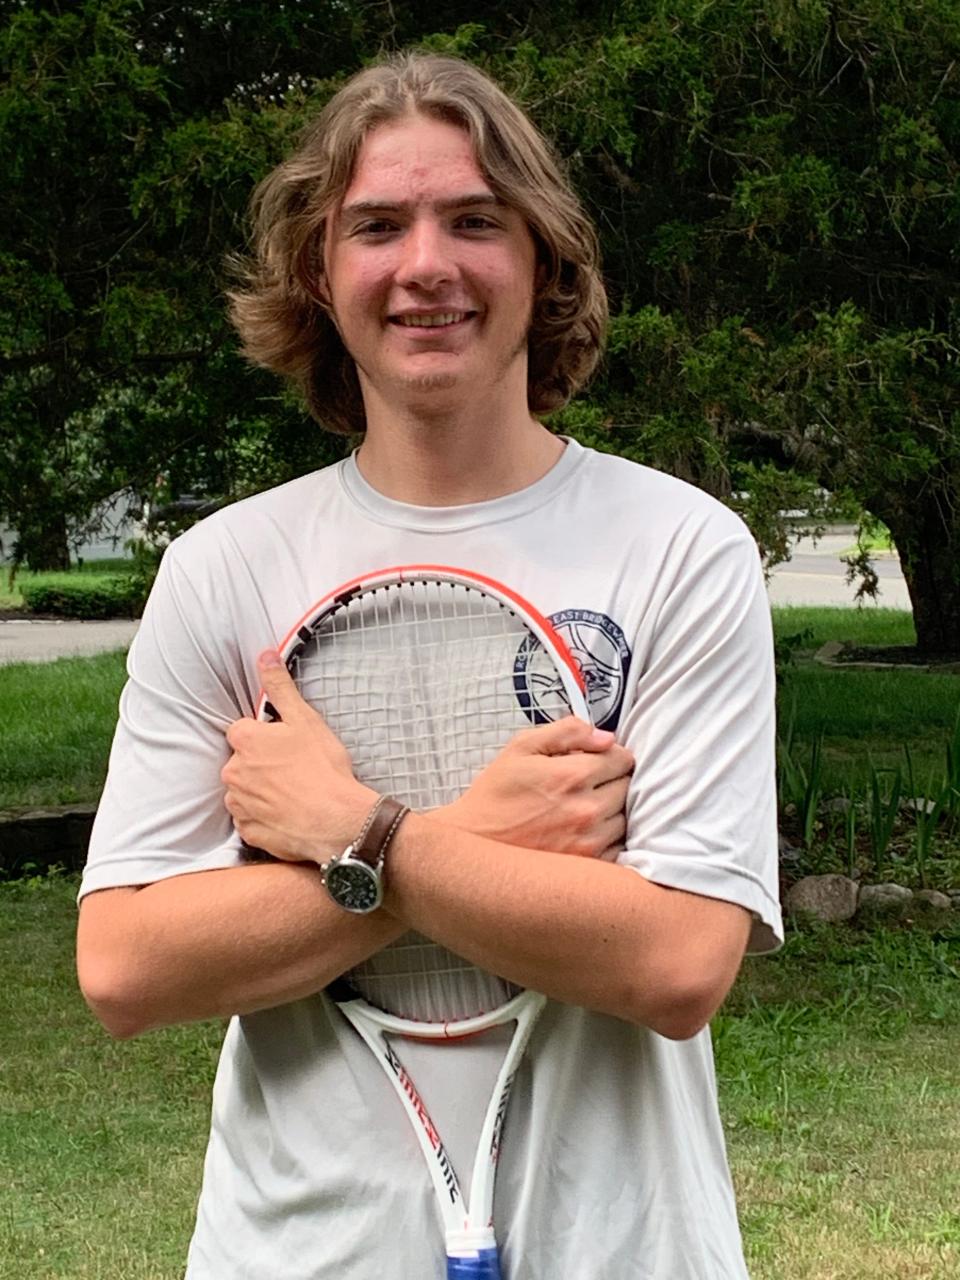 Petr Quinn of Rockland High has been named to The Patriot Ledger/Enterprise Boys Tennis All-Scholastic Team.